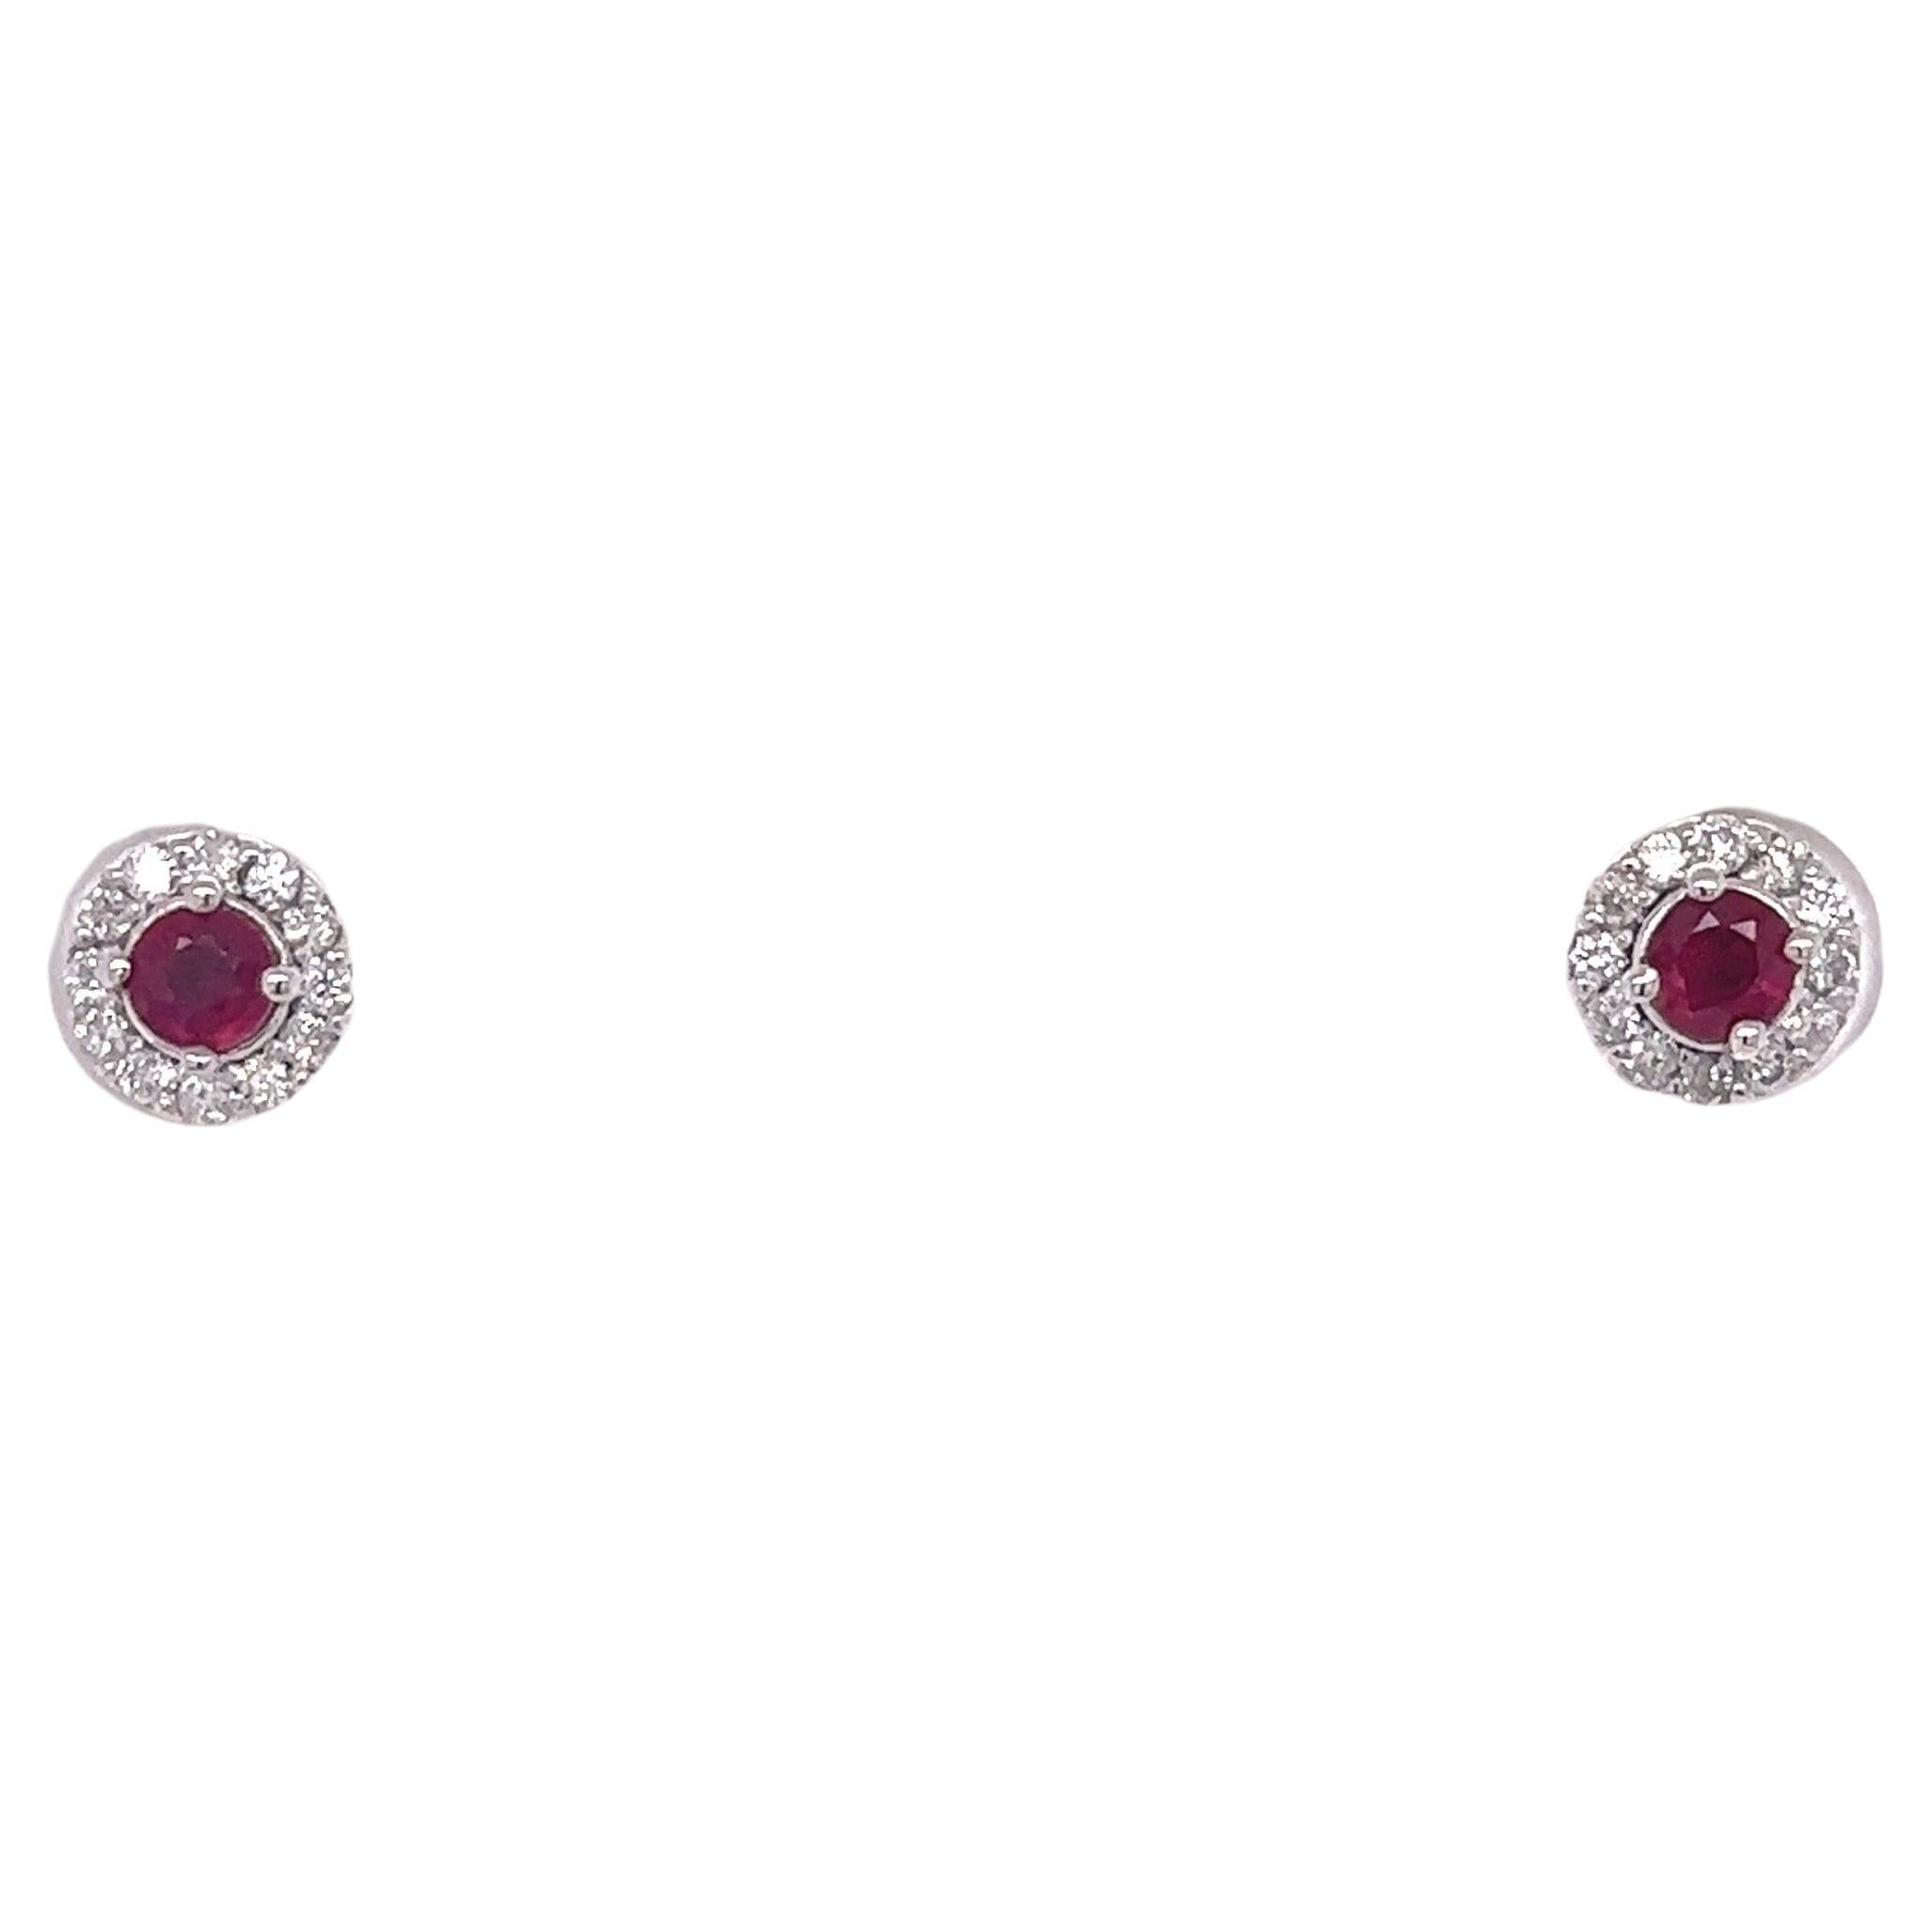 These earrings have 2 Round Cut Natural Rubies that weigh 0.48 carats and have 24 Round Cut Diamonds that weigh 0.25 carats. (Clarity: SI2, Color: F) The total carat weight of the earrings are 0.73 carats.

They are made in 14 Karat White Gold and